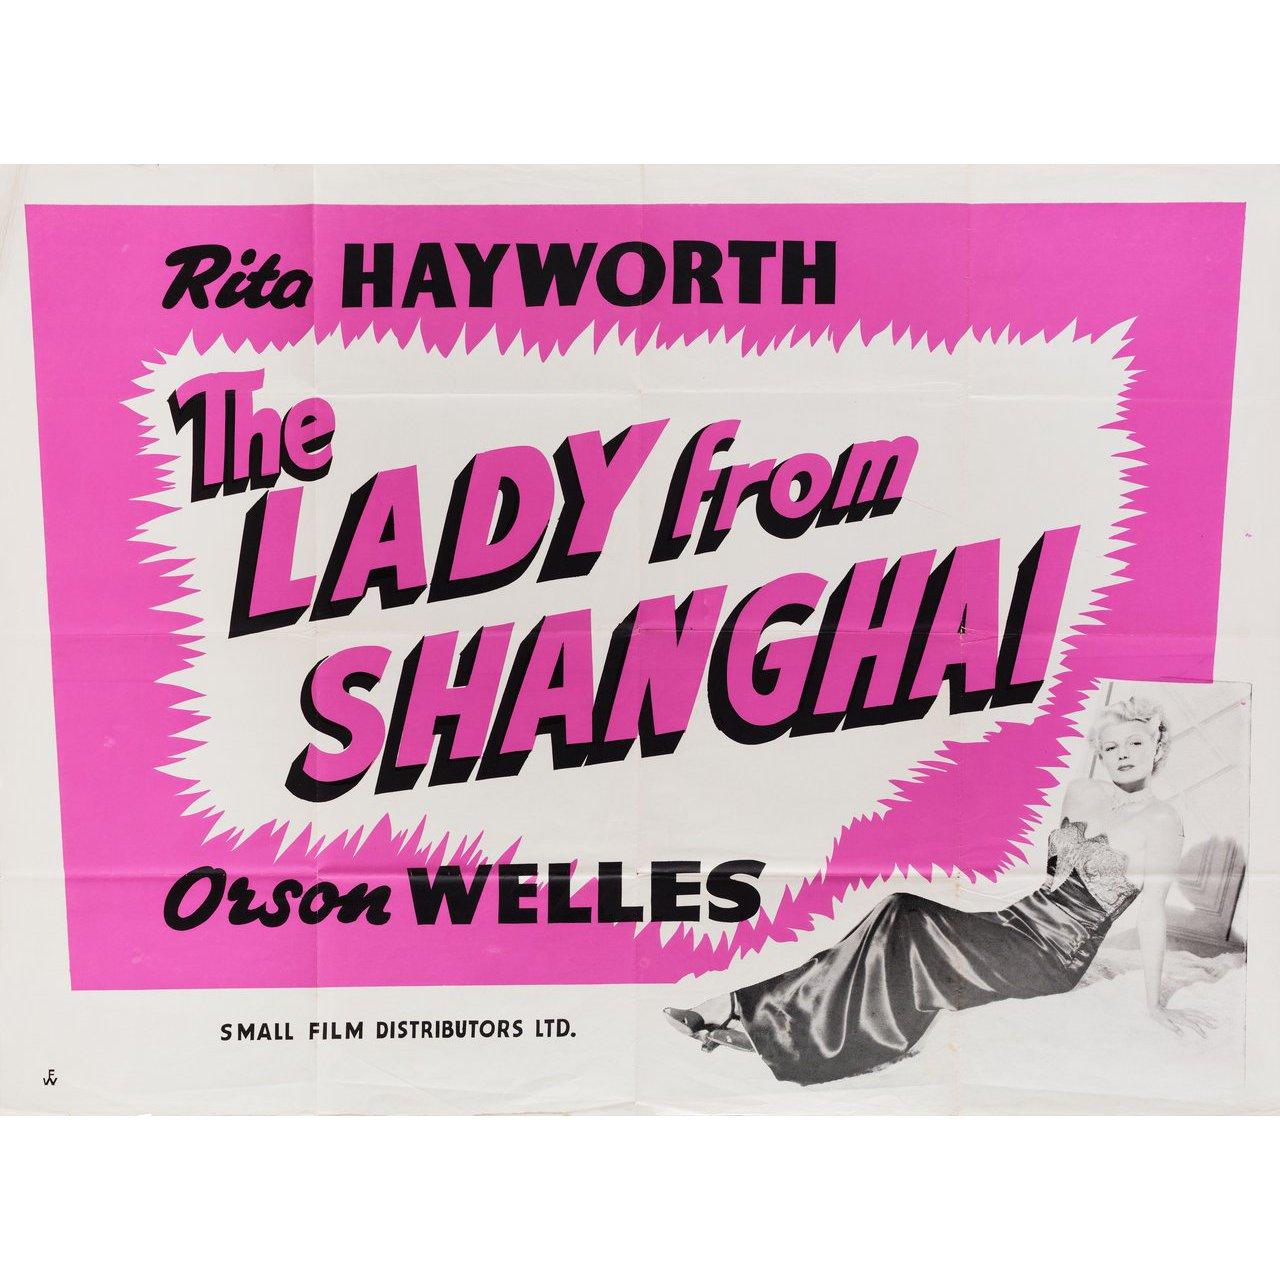 Original 1950s re-release British quad poster for the 1947 film The Lady from Shanghai directed by Orson Welles with Rita Hayworth / Orson Welles / Everett Sloane / Glenn Anders. Very Good condition, folded. Many original posters were issued folded